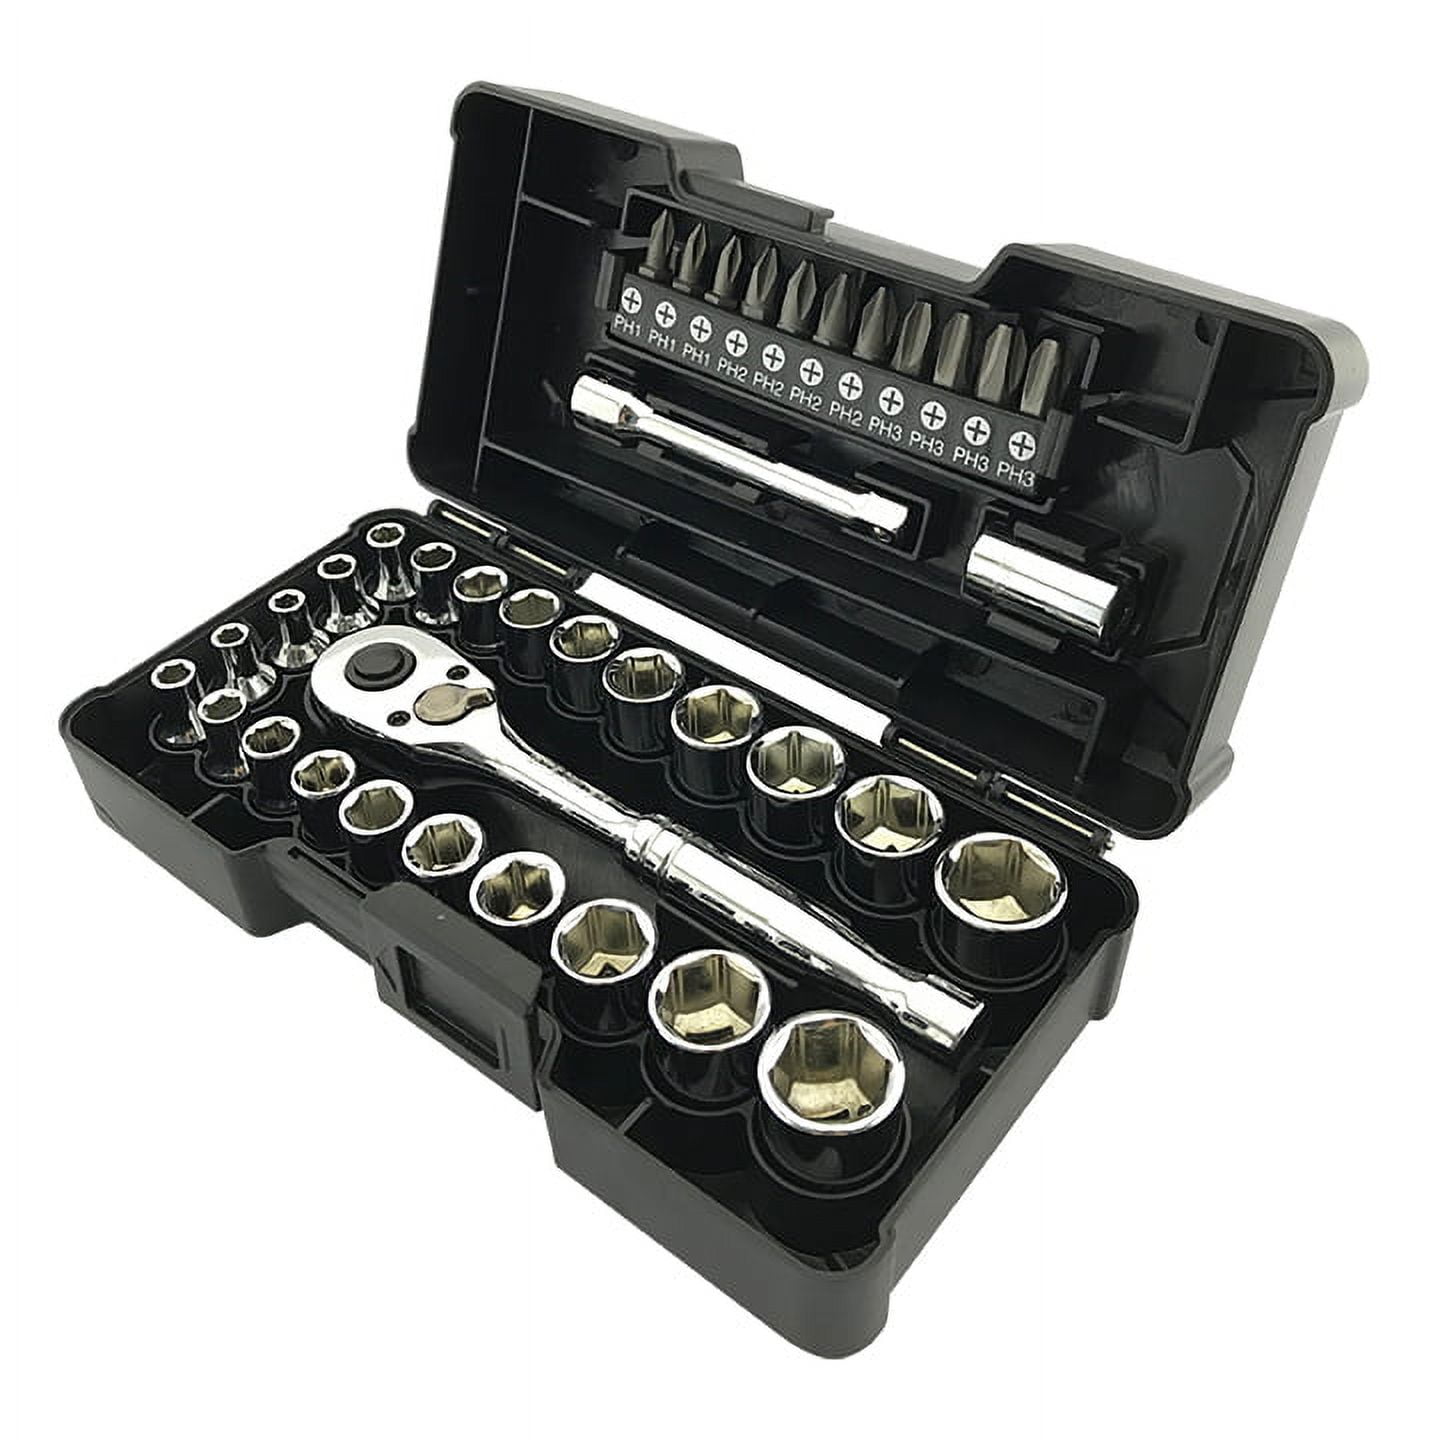 STANLEY MINI TOOLKIT FOR TOURING  STANLEY STMT72794-8-12 1/4 Drive Metric  Socket Set review 